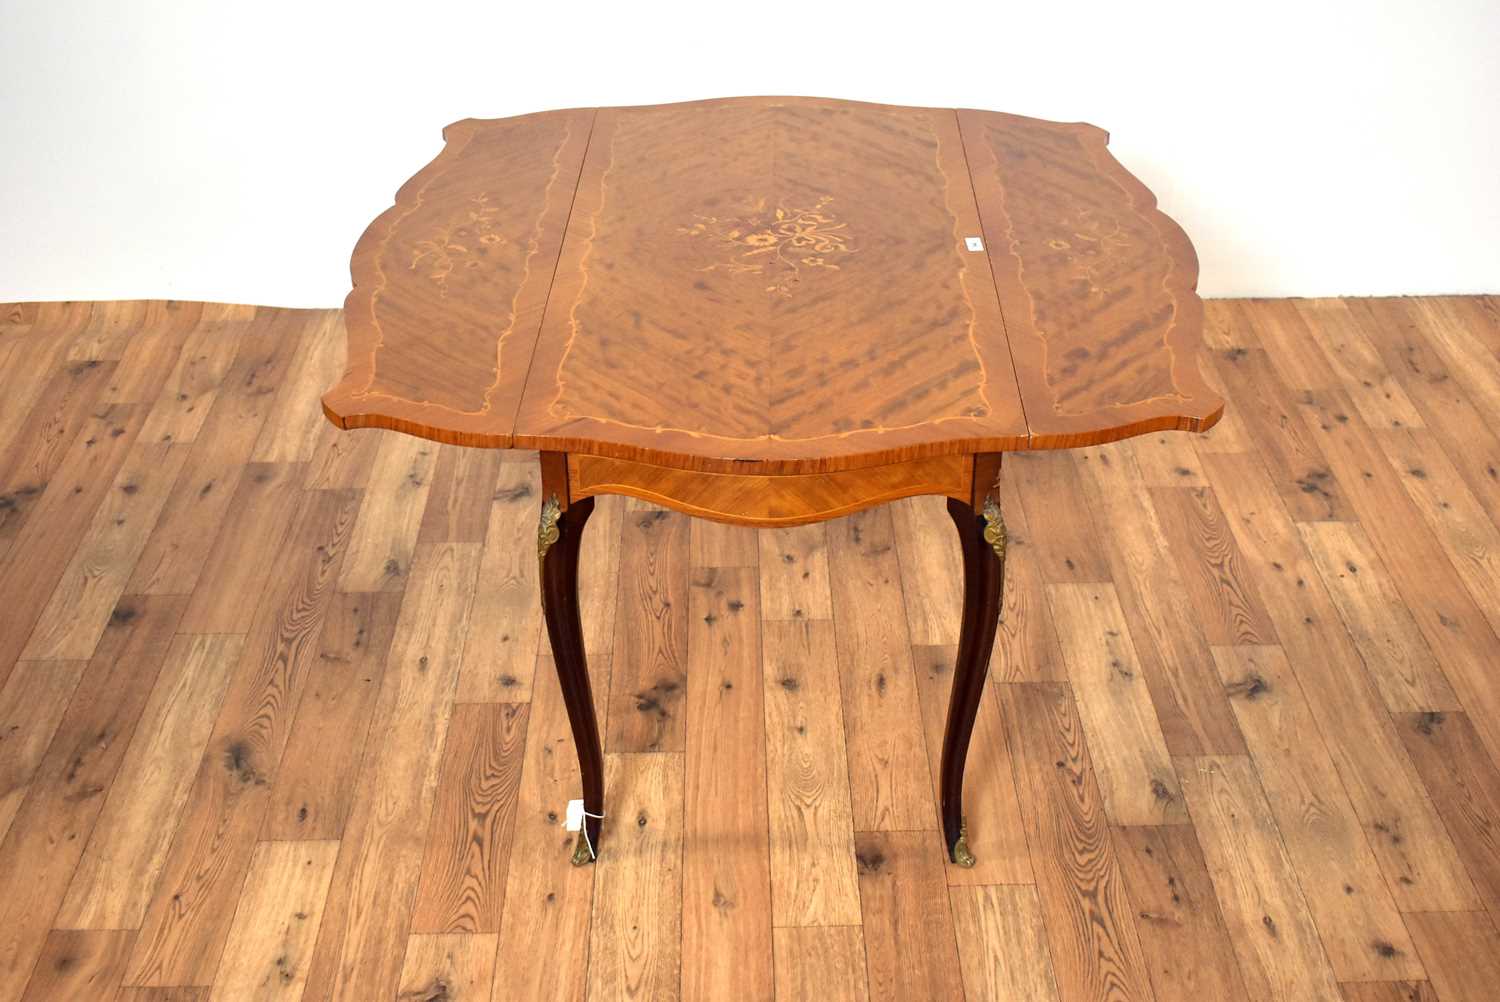 A Regency Revival demi lune inlaid mahogany hall table with a Regency Revival drop leaf table - Image 7 of 9